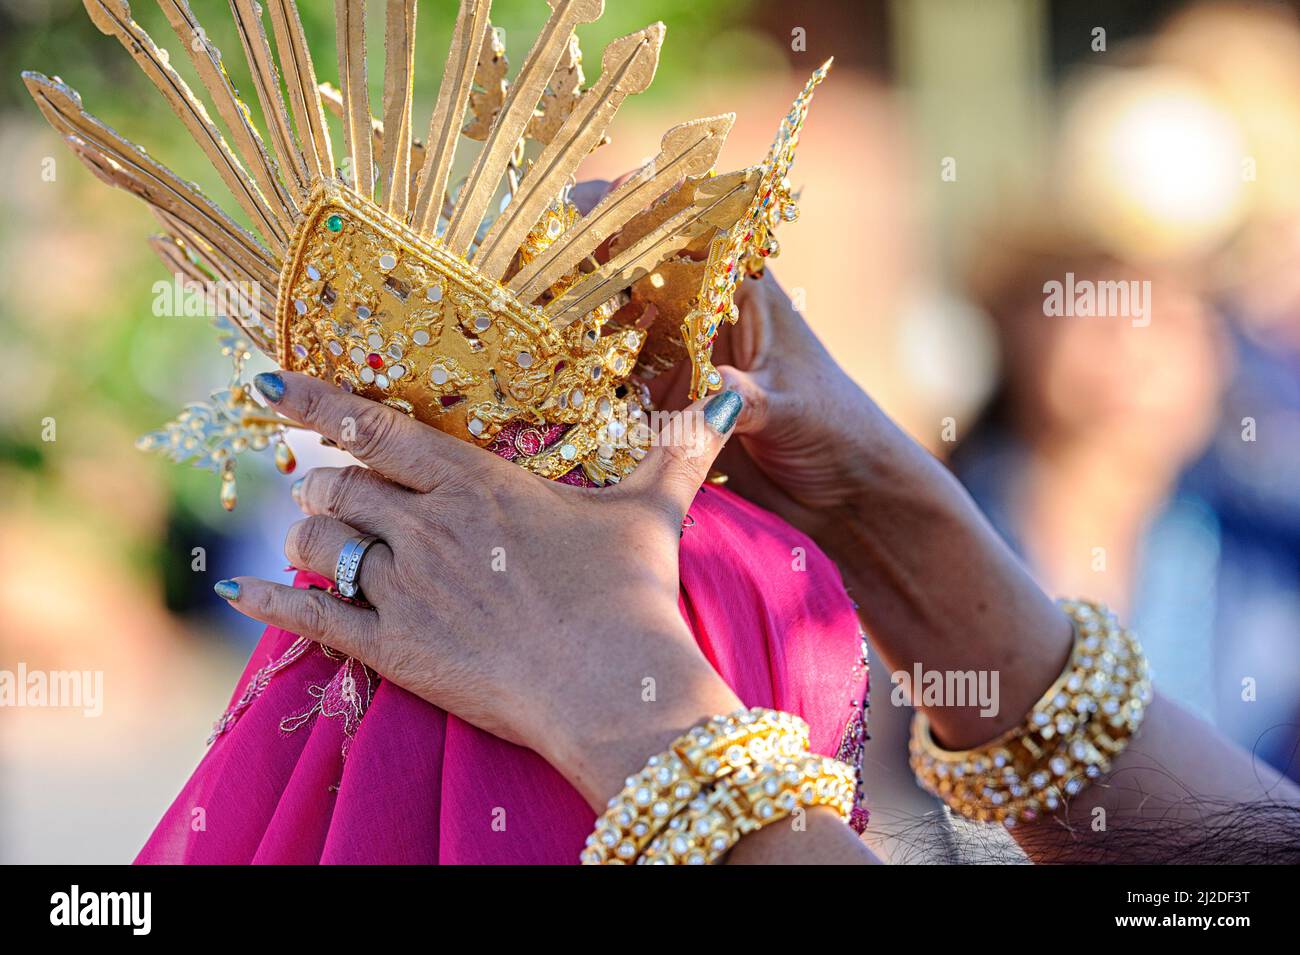 Two women from the Thai Community adjusting the traditional crown (apsara diadem) of Thailand Stock Photo